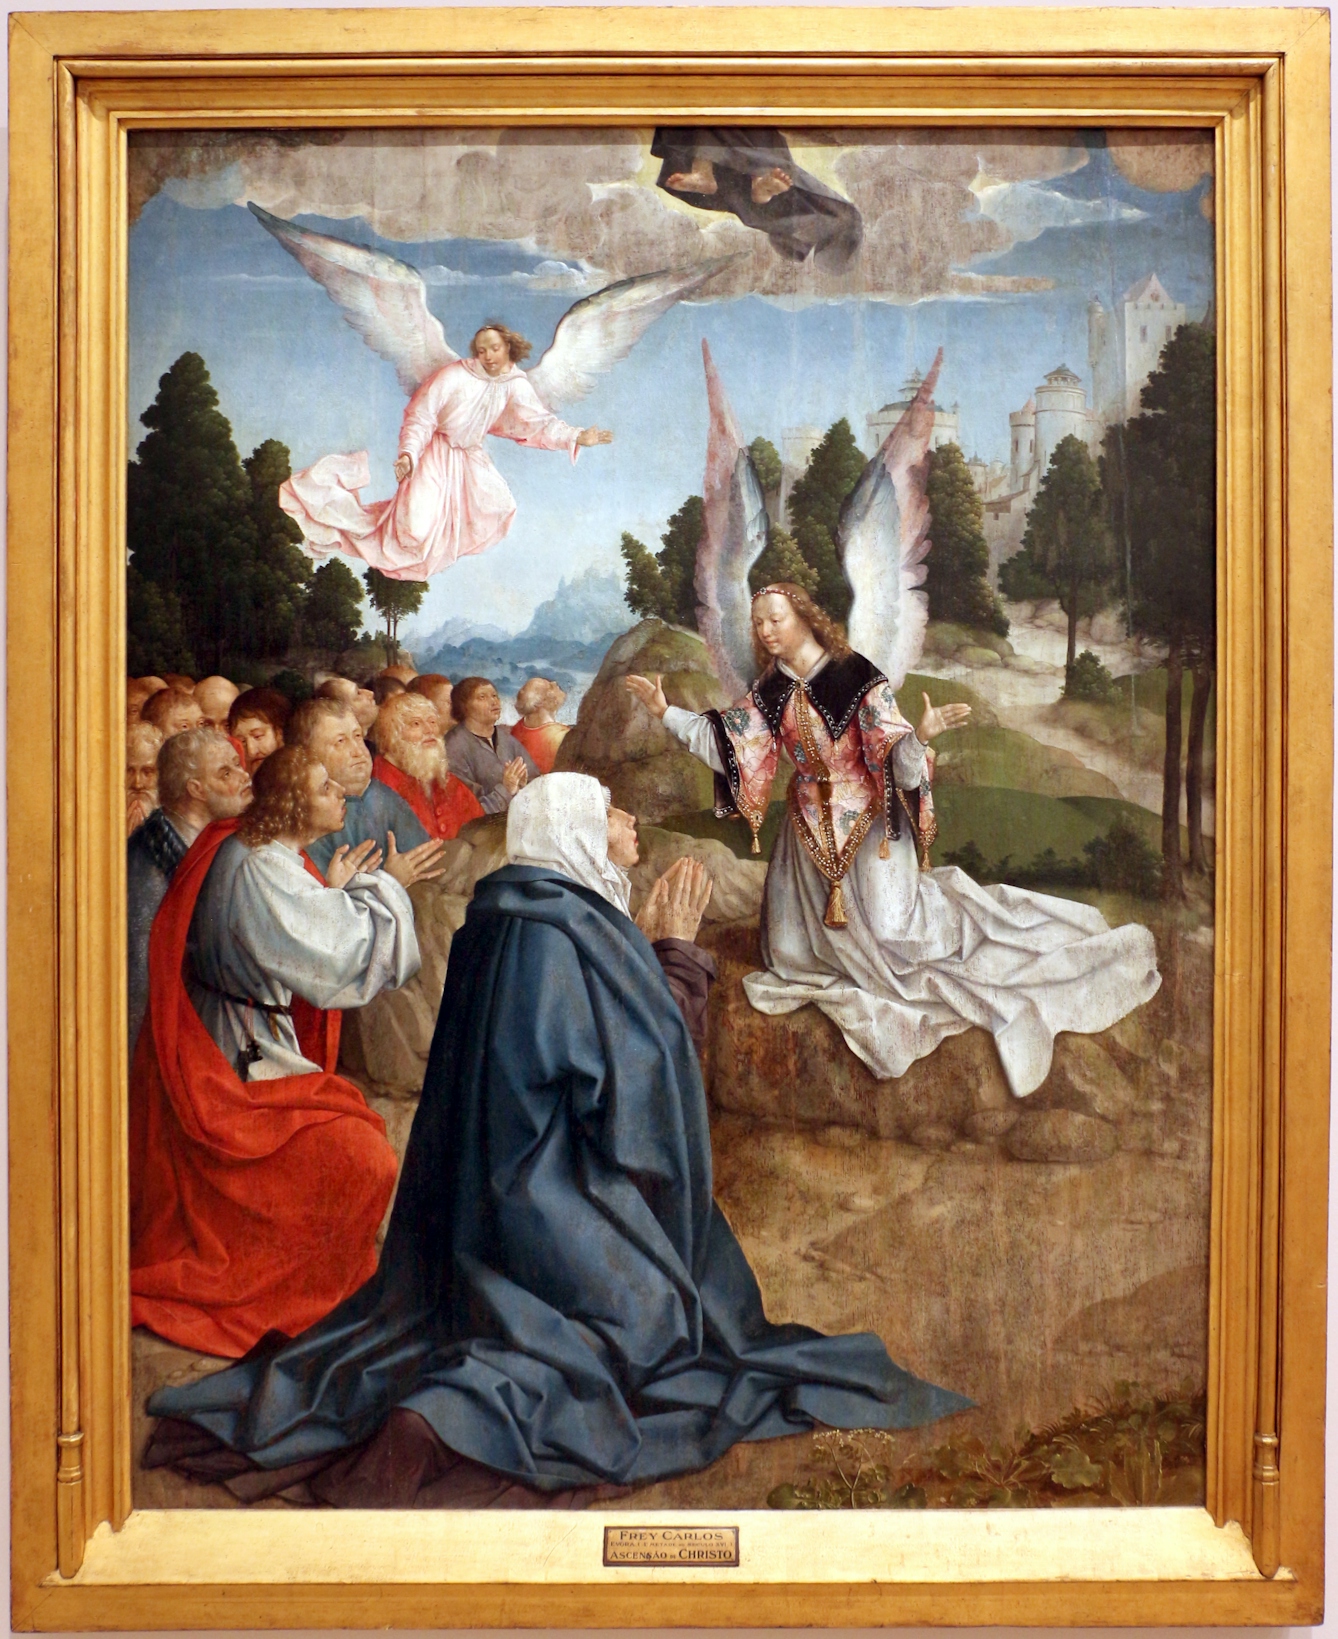 Oil painting depicting a group of kneeling figures accopmanied by two angels. In the sky above them, two feet protrude from the bottom of a robe, represrenting Christ's acsension into heaven.